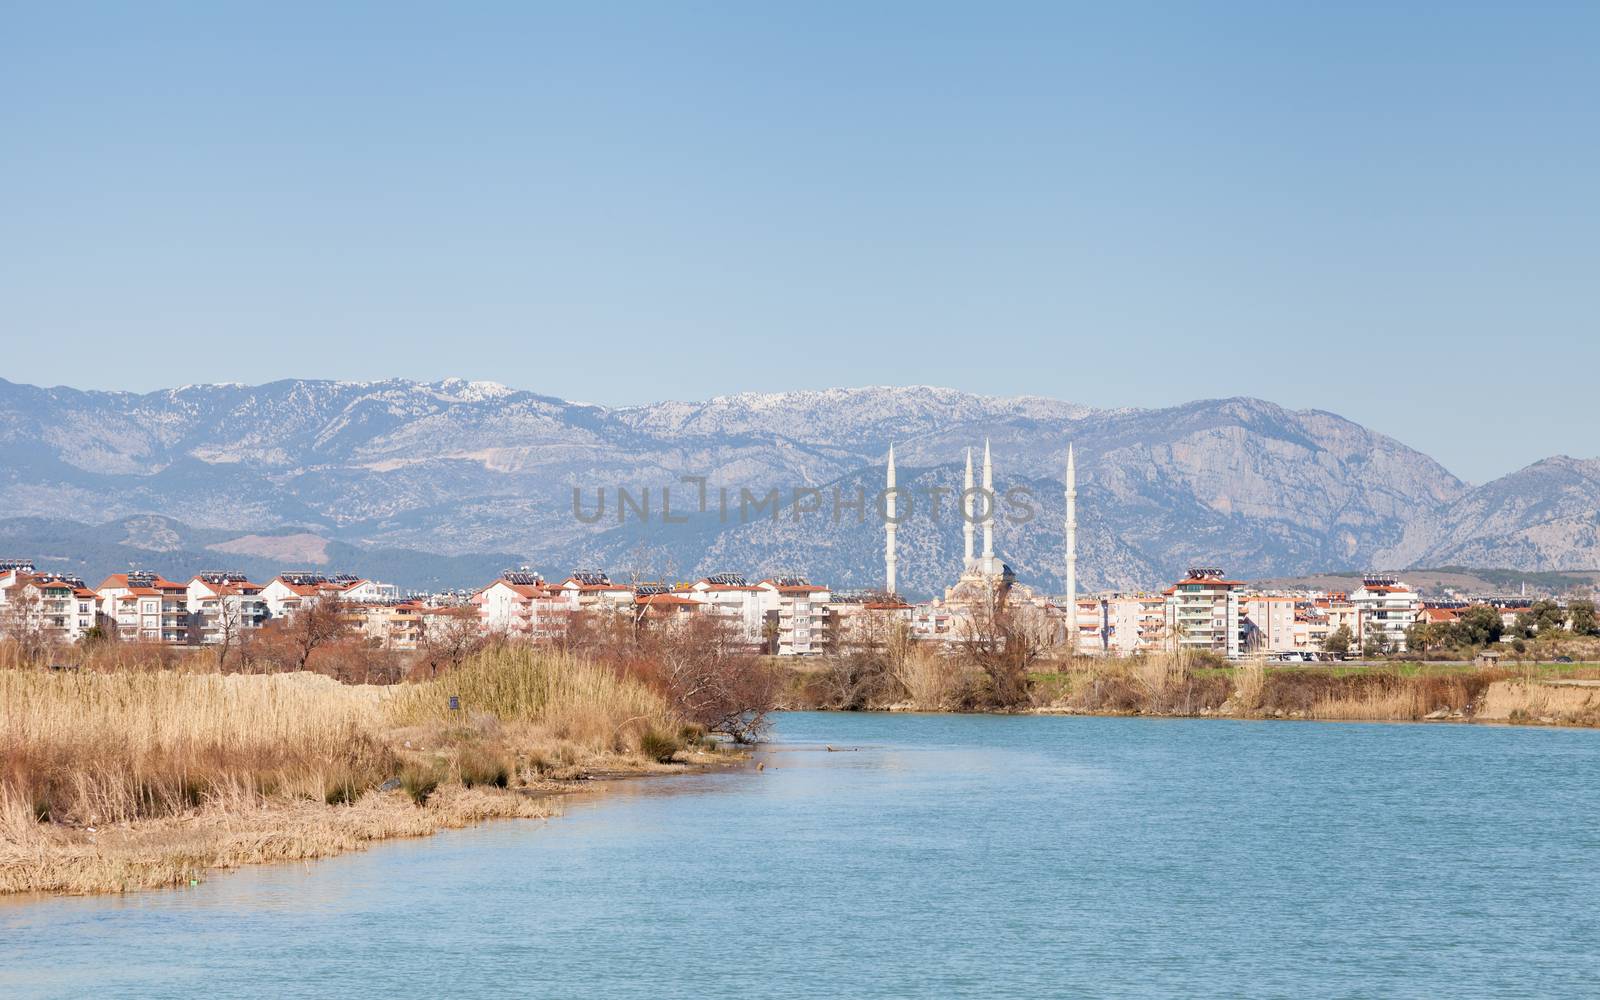 The view looking up Manavgat River towards the town of Manavgat in the province of Antalya, southern Turkey. Kulliye mosque, with its four minarets can be seen dominating the skyline.